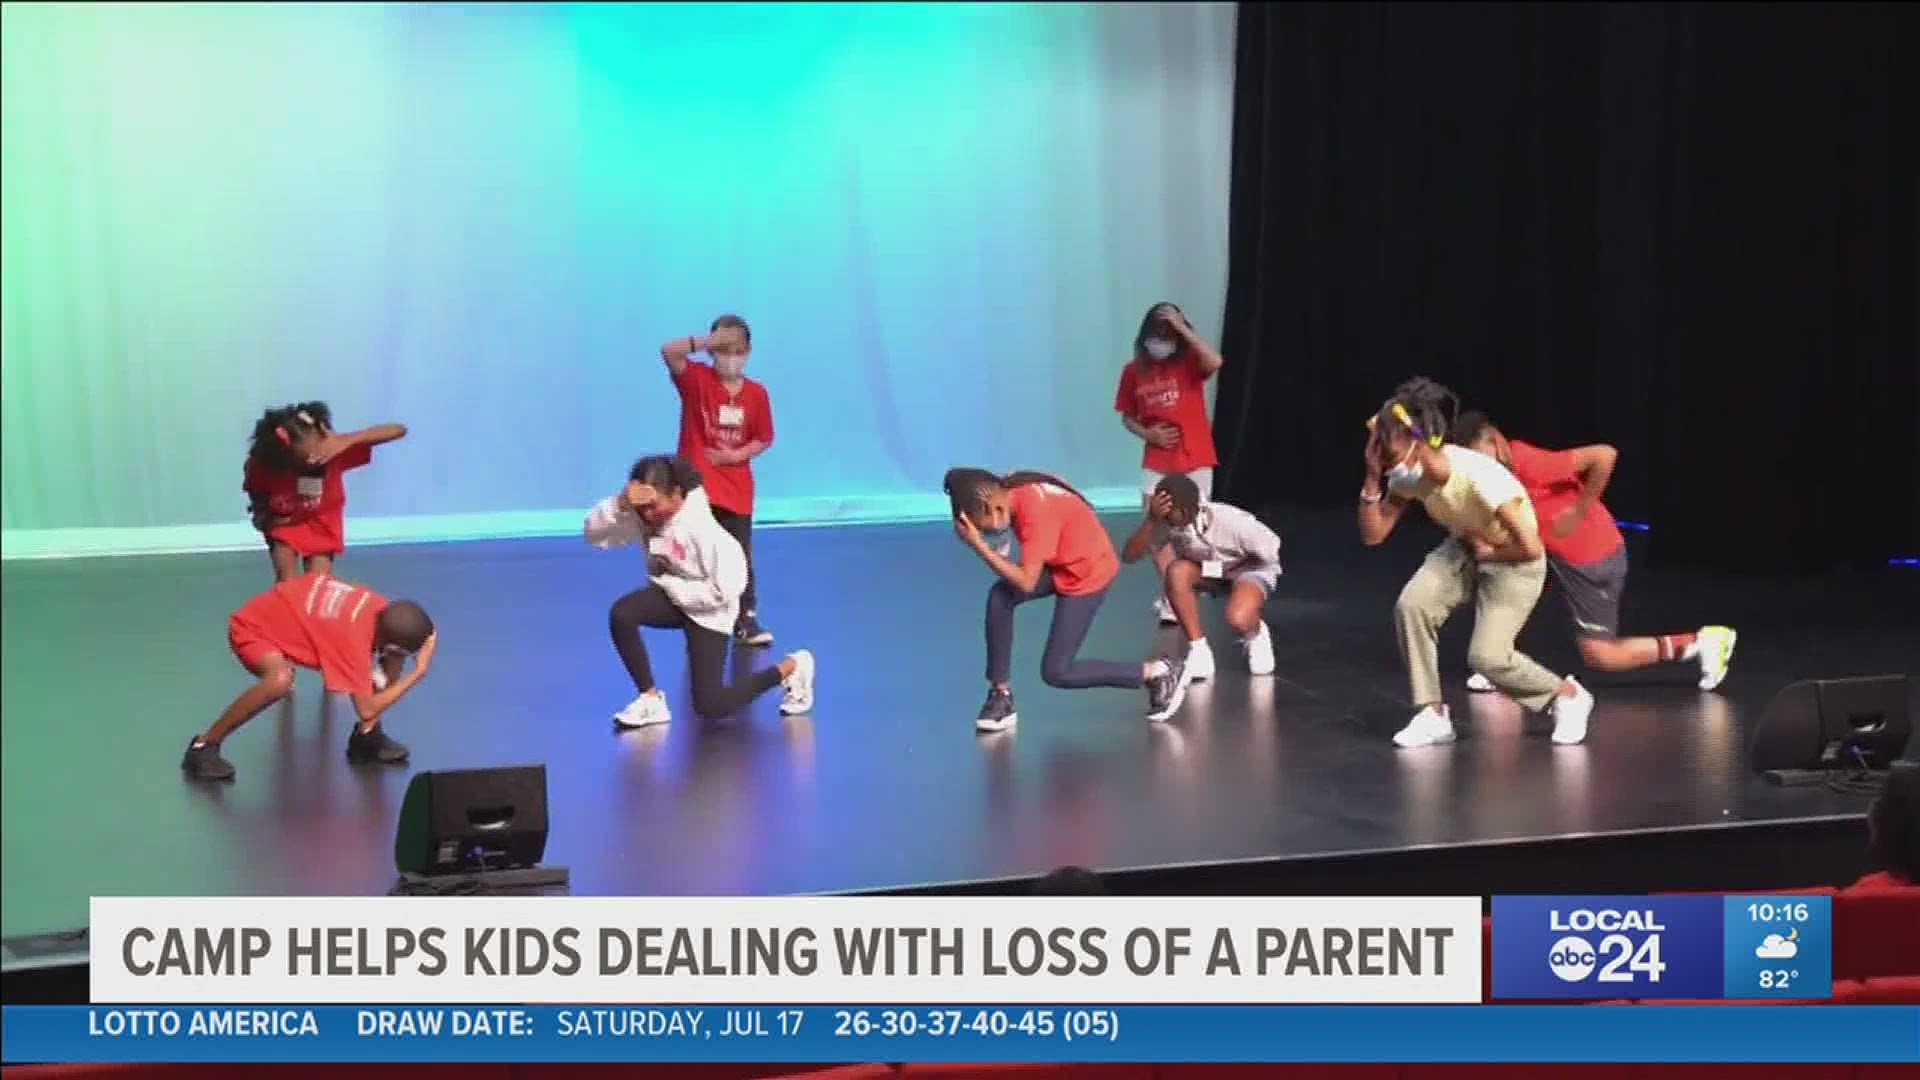 When Orpheum Theatre CEO created Mending Hearts Camp to help kids through the grief of parental loss, he already knew their pain.